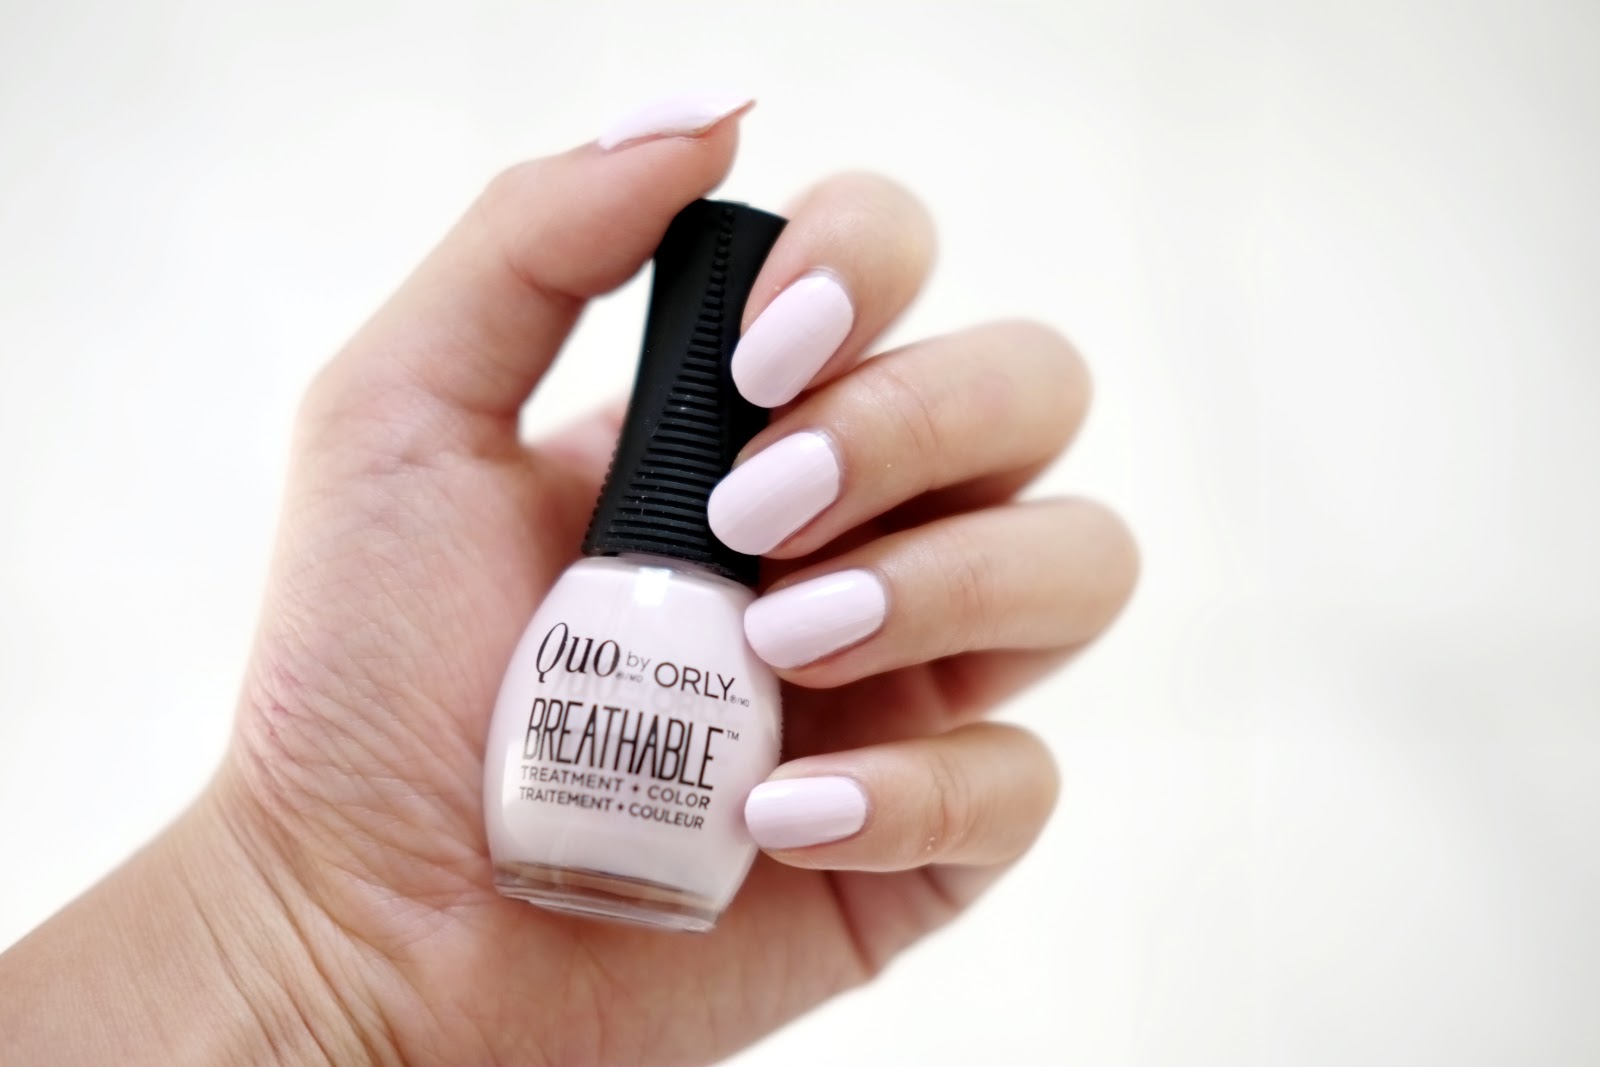 7. Orly Breathable Treatment + Color Nail Polish in "Mixed Tones" - wide 6